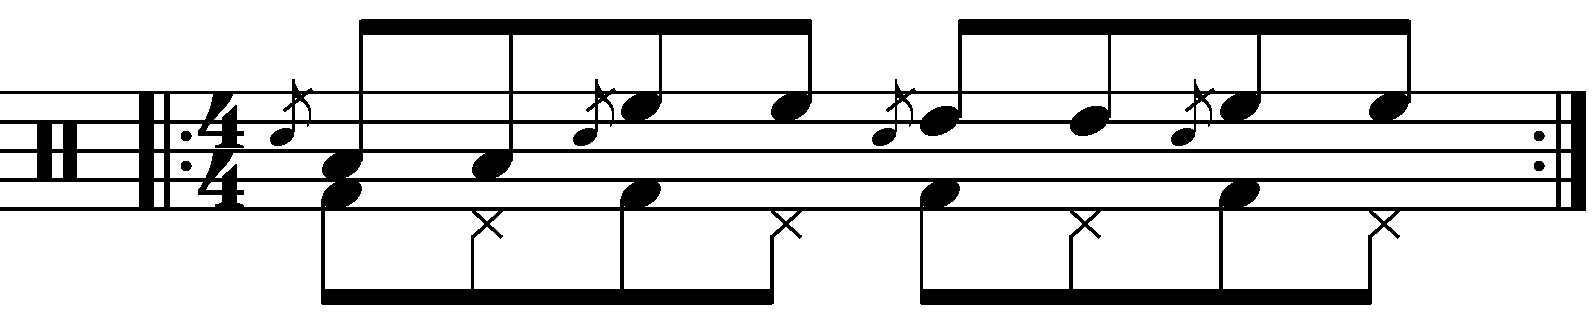 Flam tap with moving standard notes